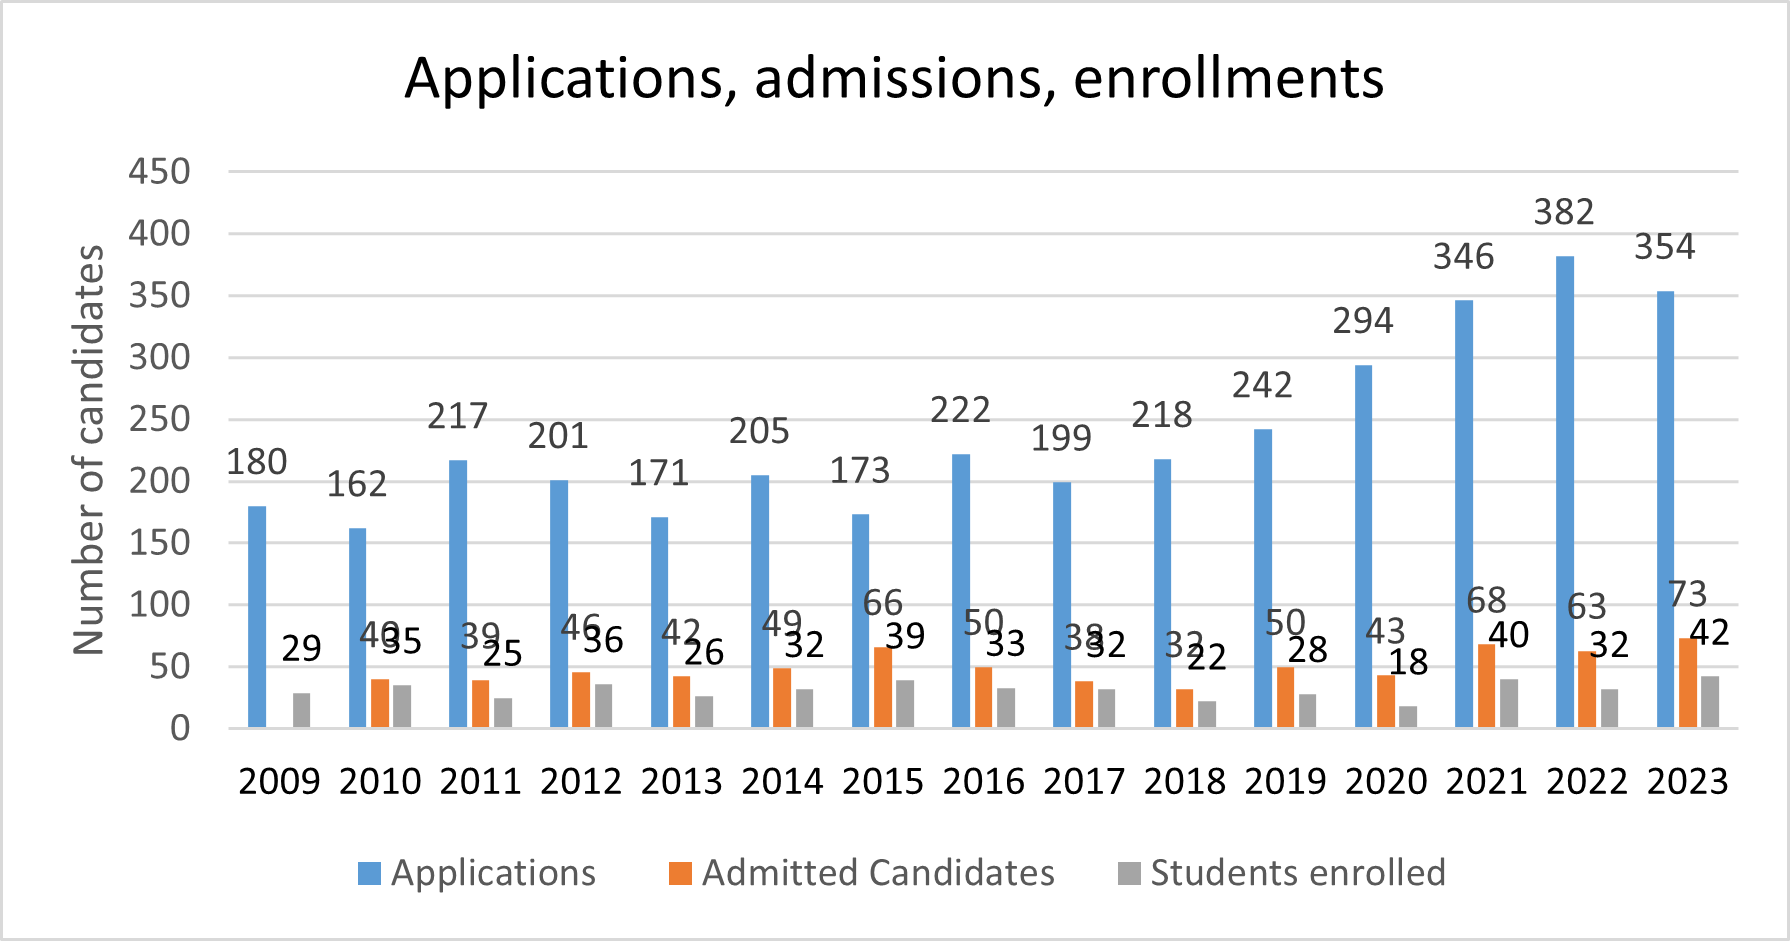 Number of applications, admissions and enrollments